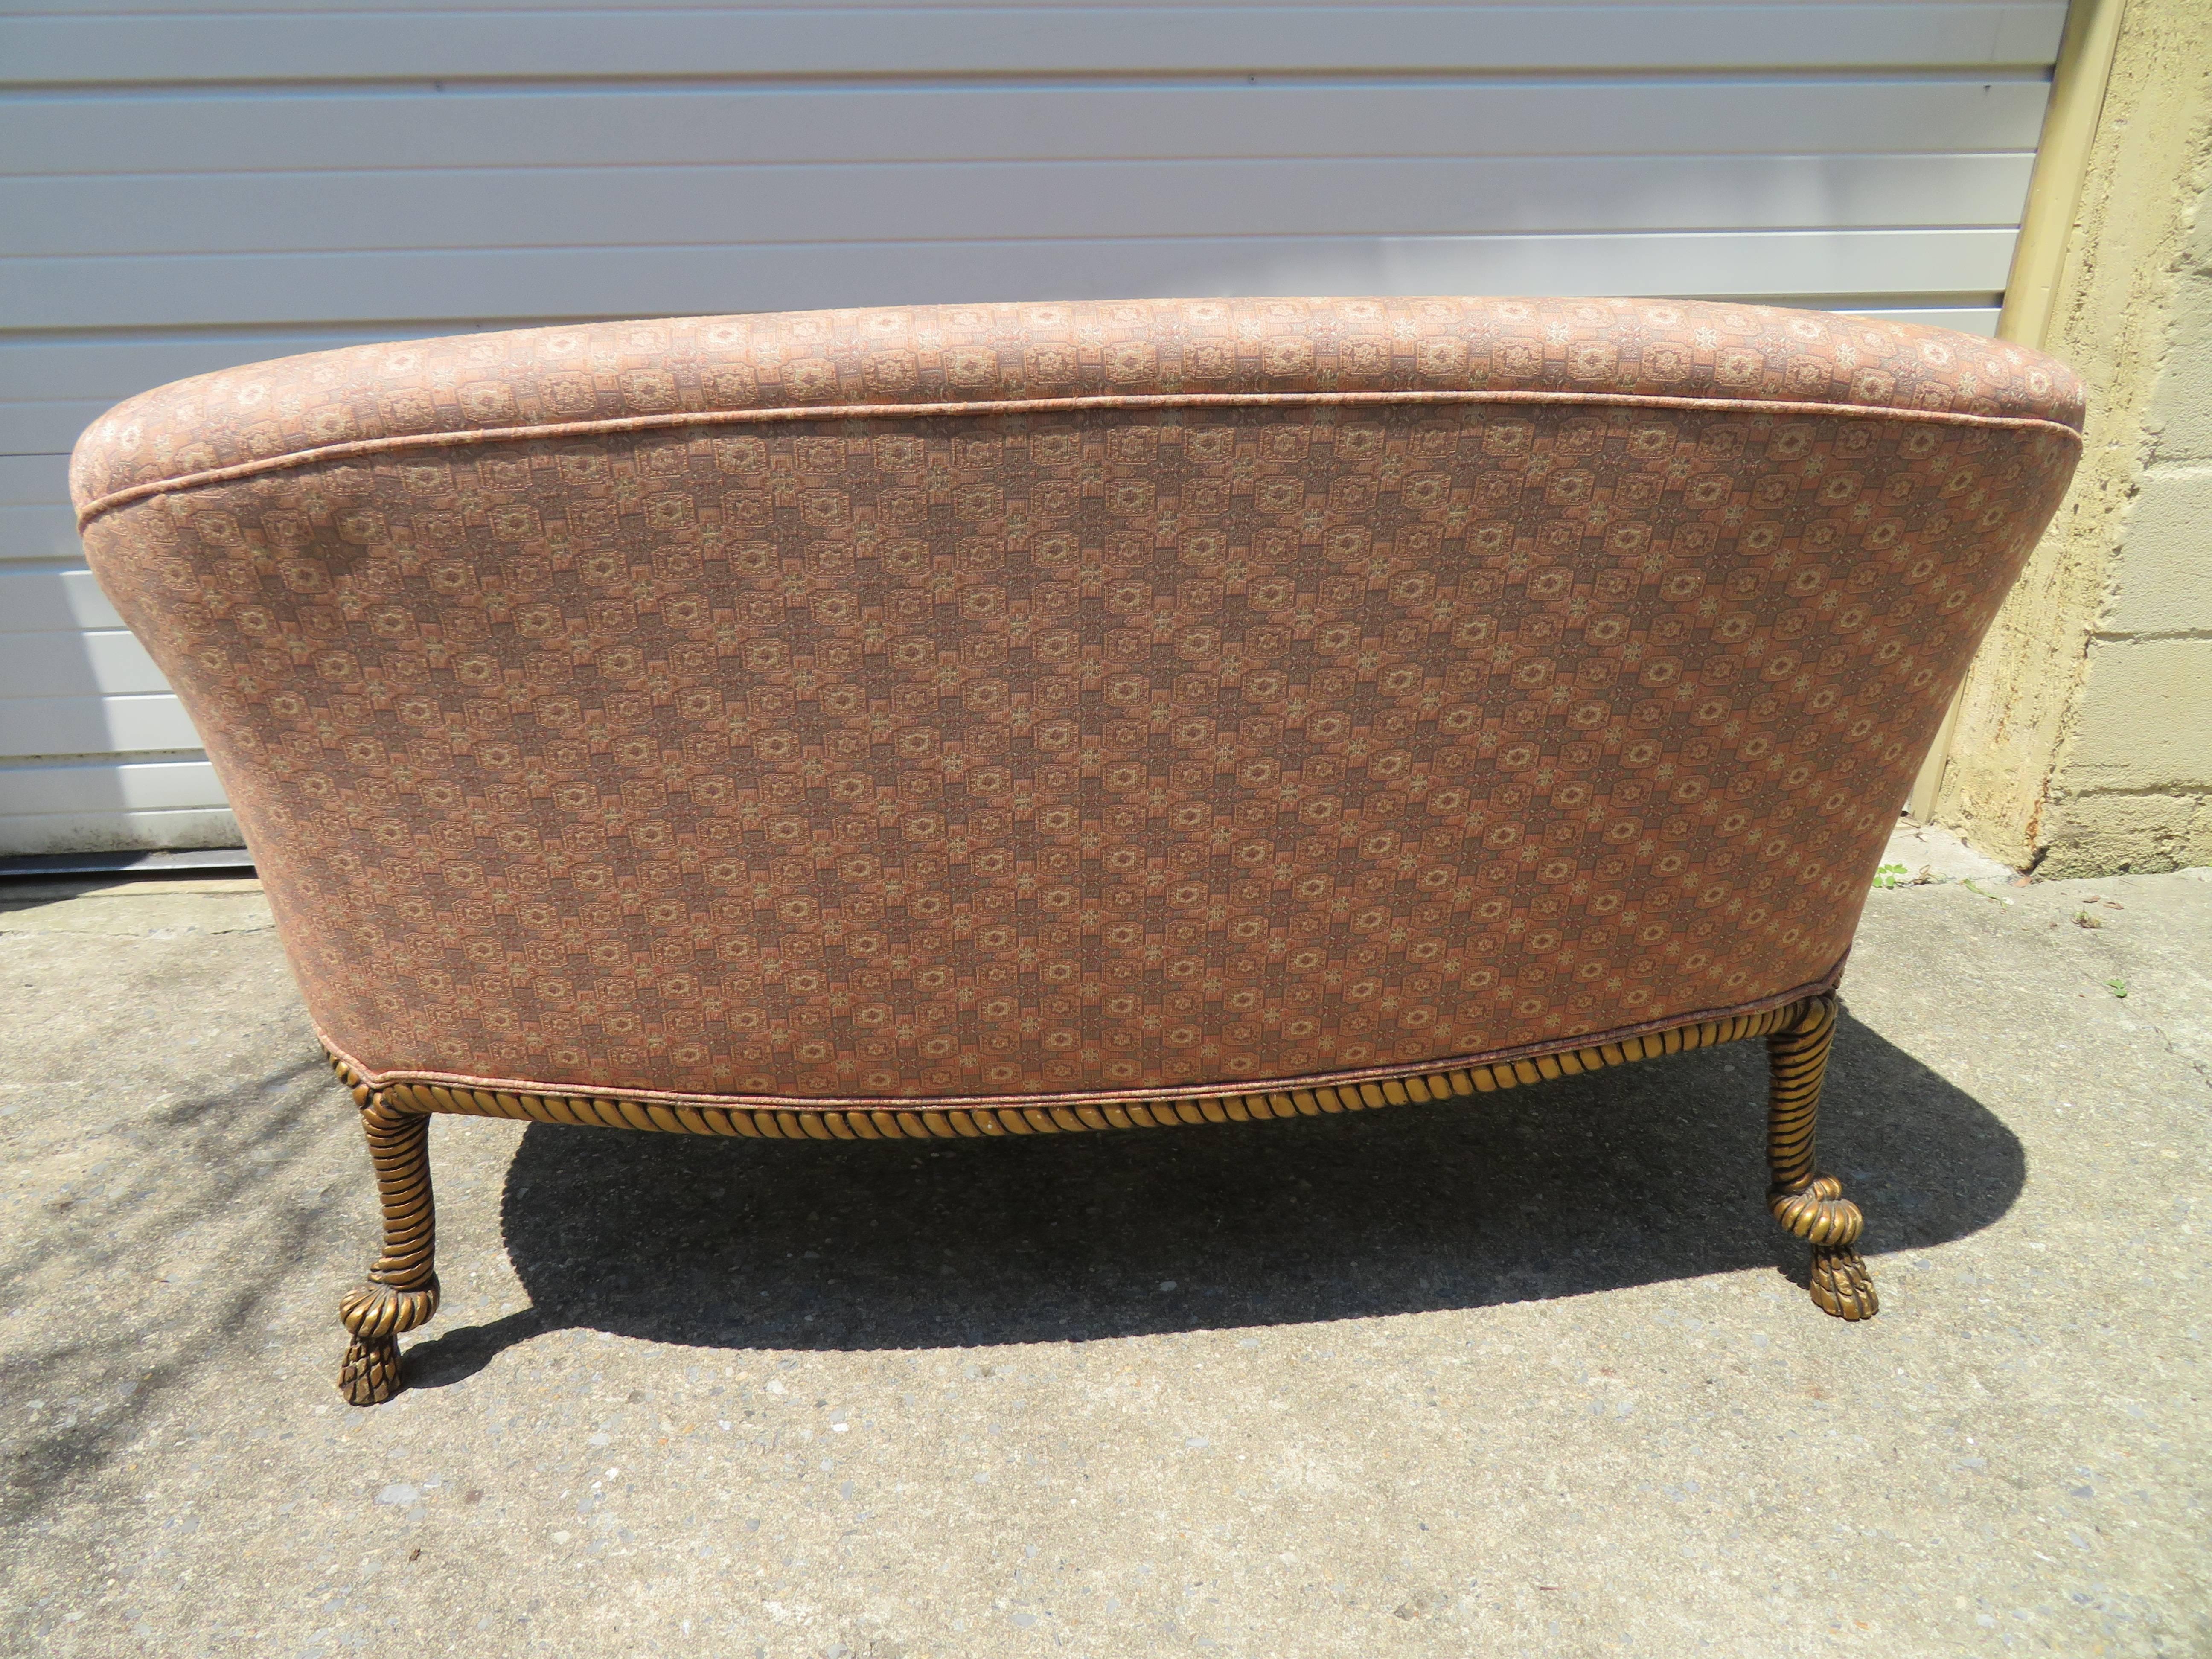 Magnificent Rope and Tasseled Gilded Sofa Regency Modern Dorothy Draper Style In Good Condition For Sale In Pemberton, NJ